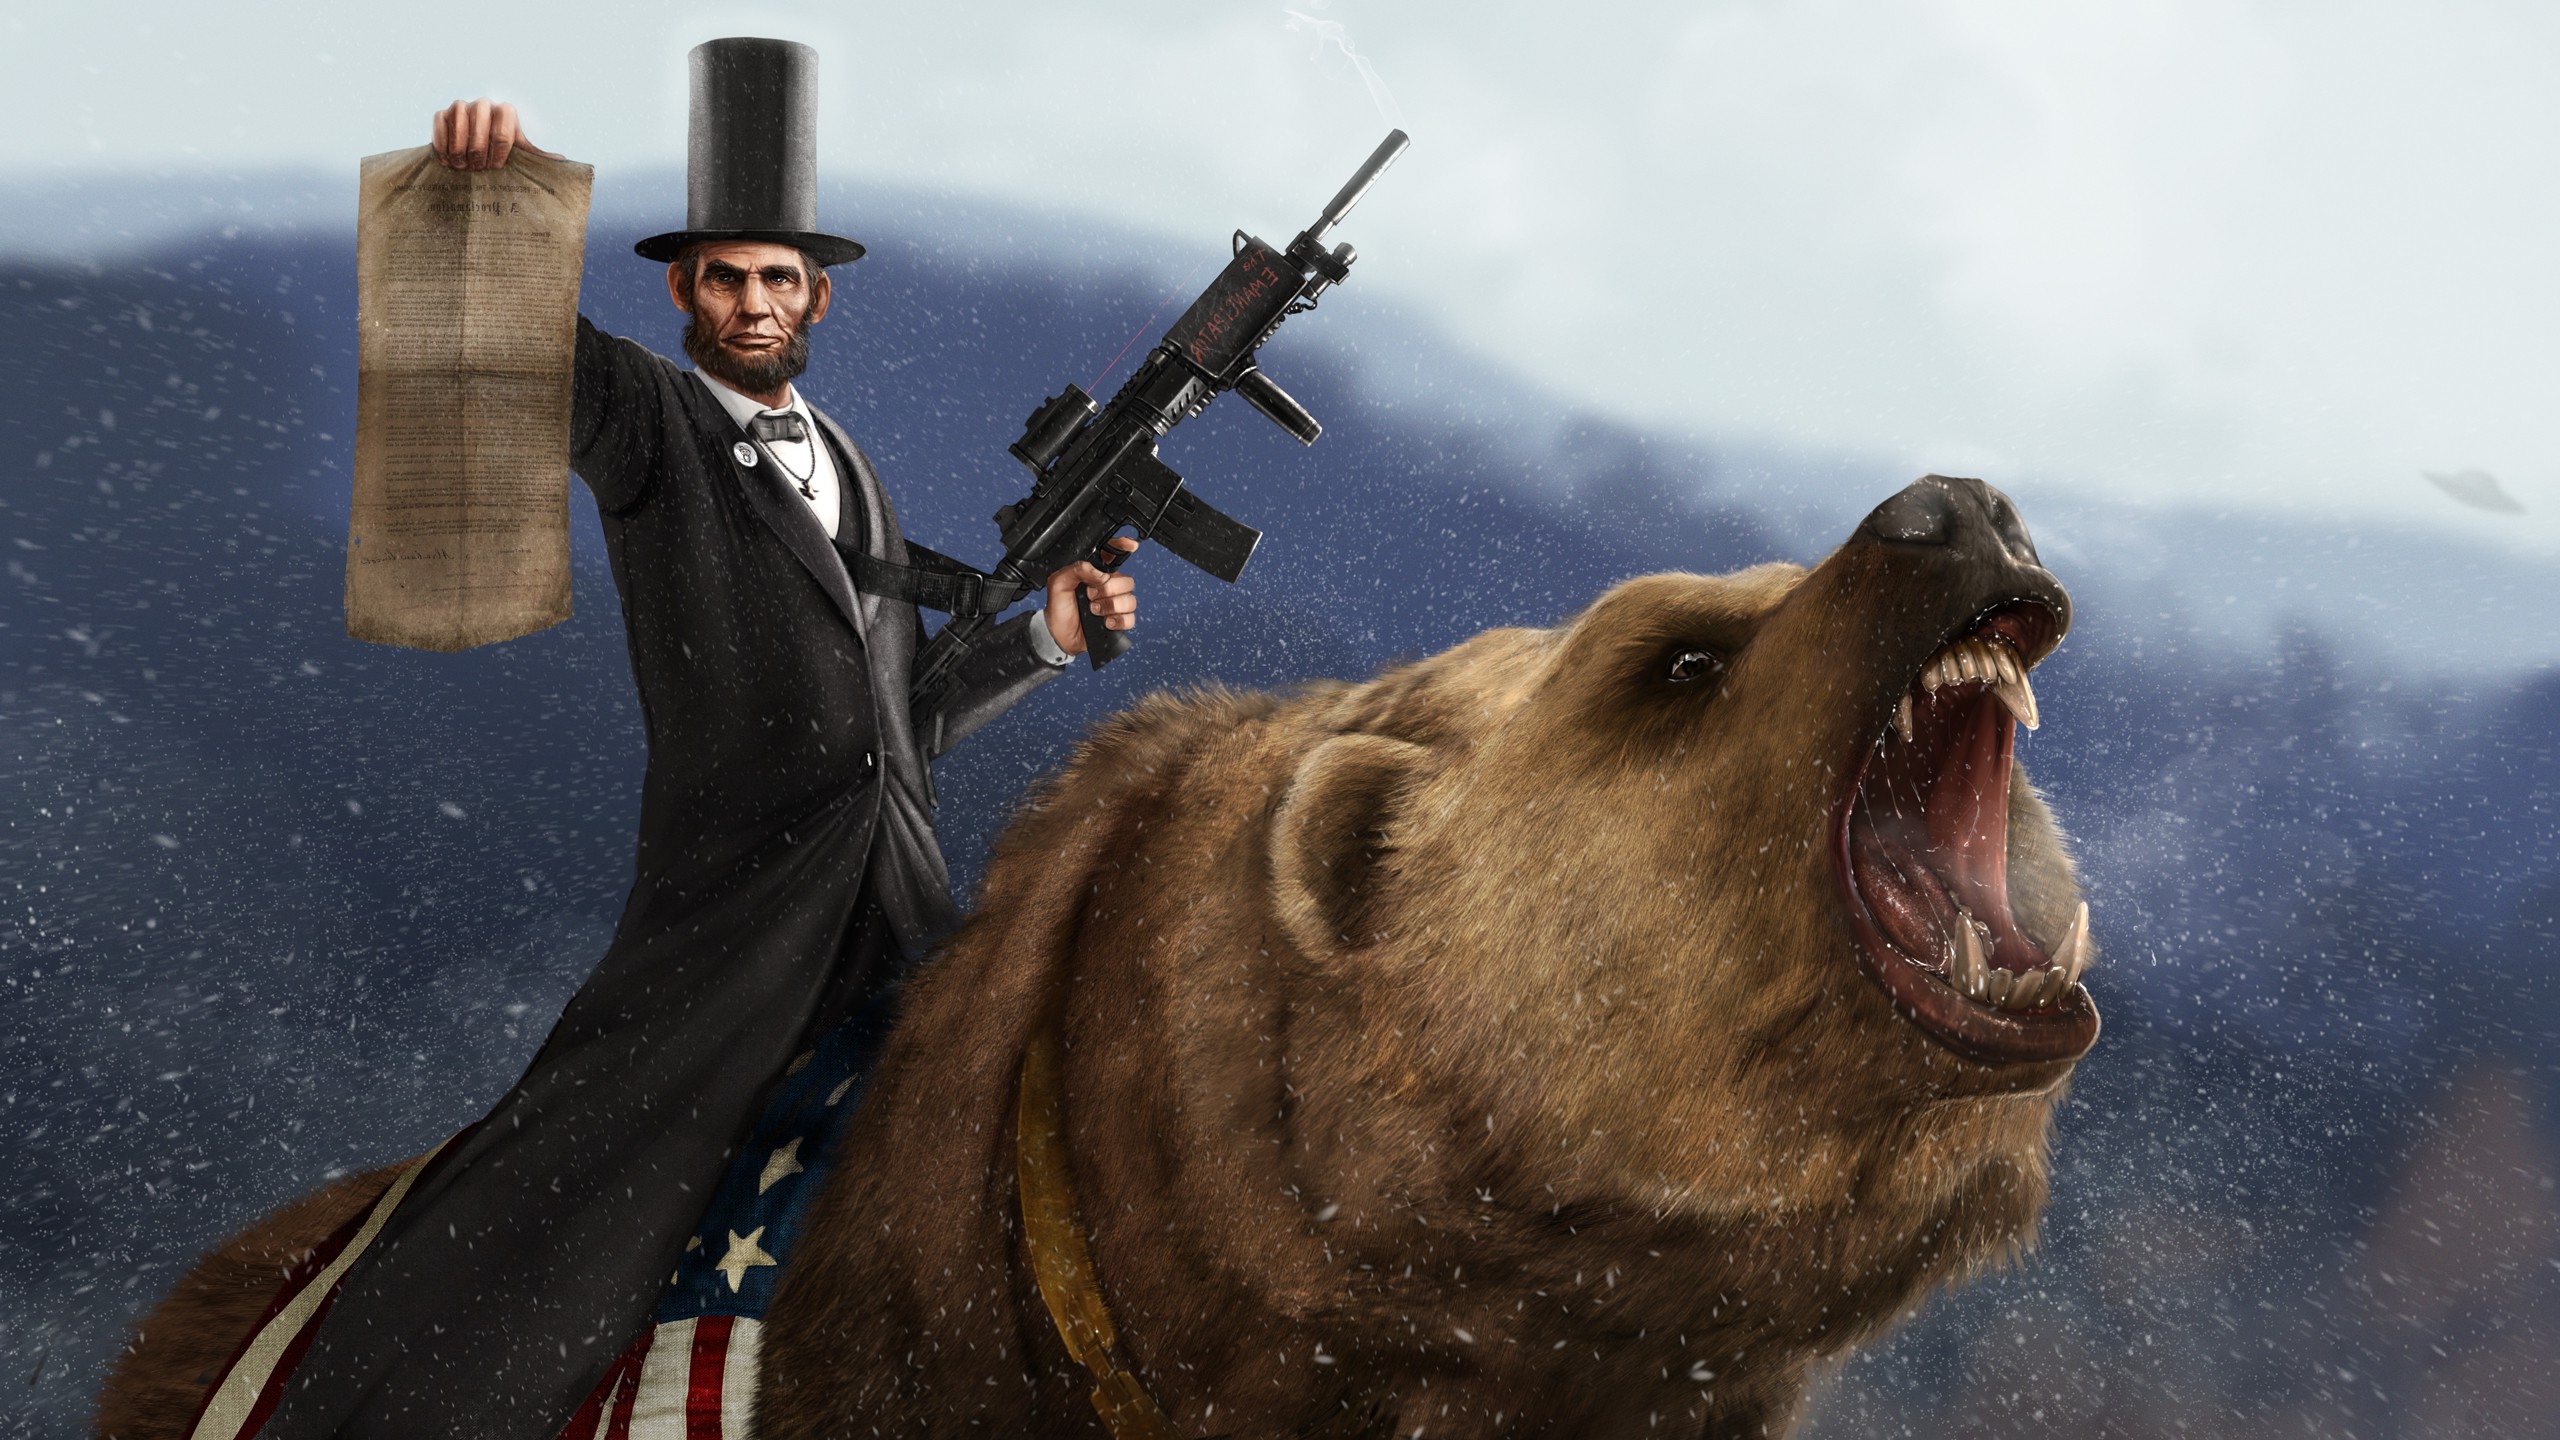 bears, Abraham Lincoln, Weapon, Rare, Humor, Presidents Wallpapers HD